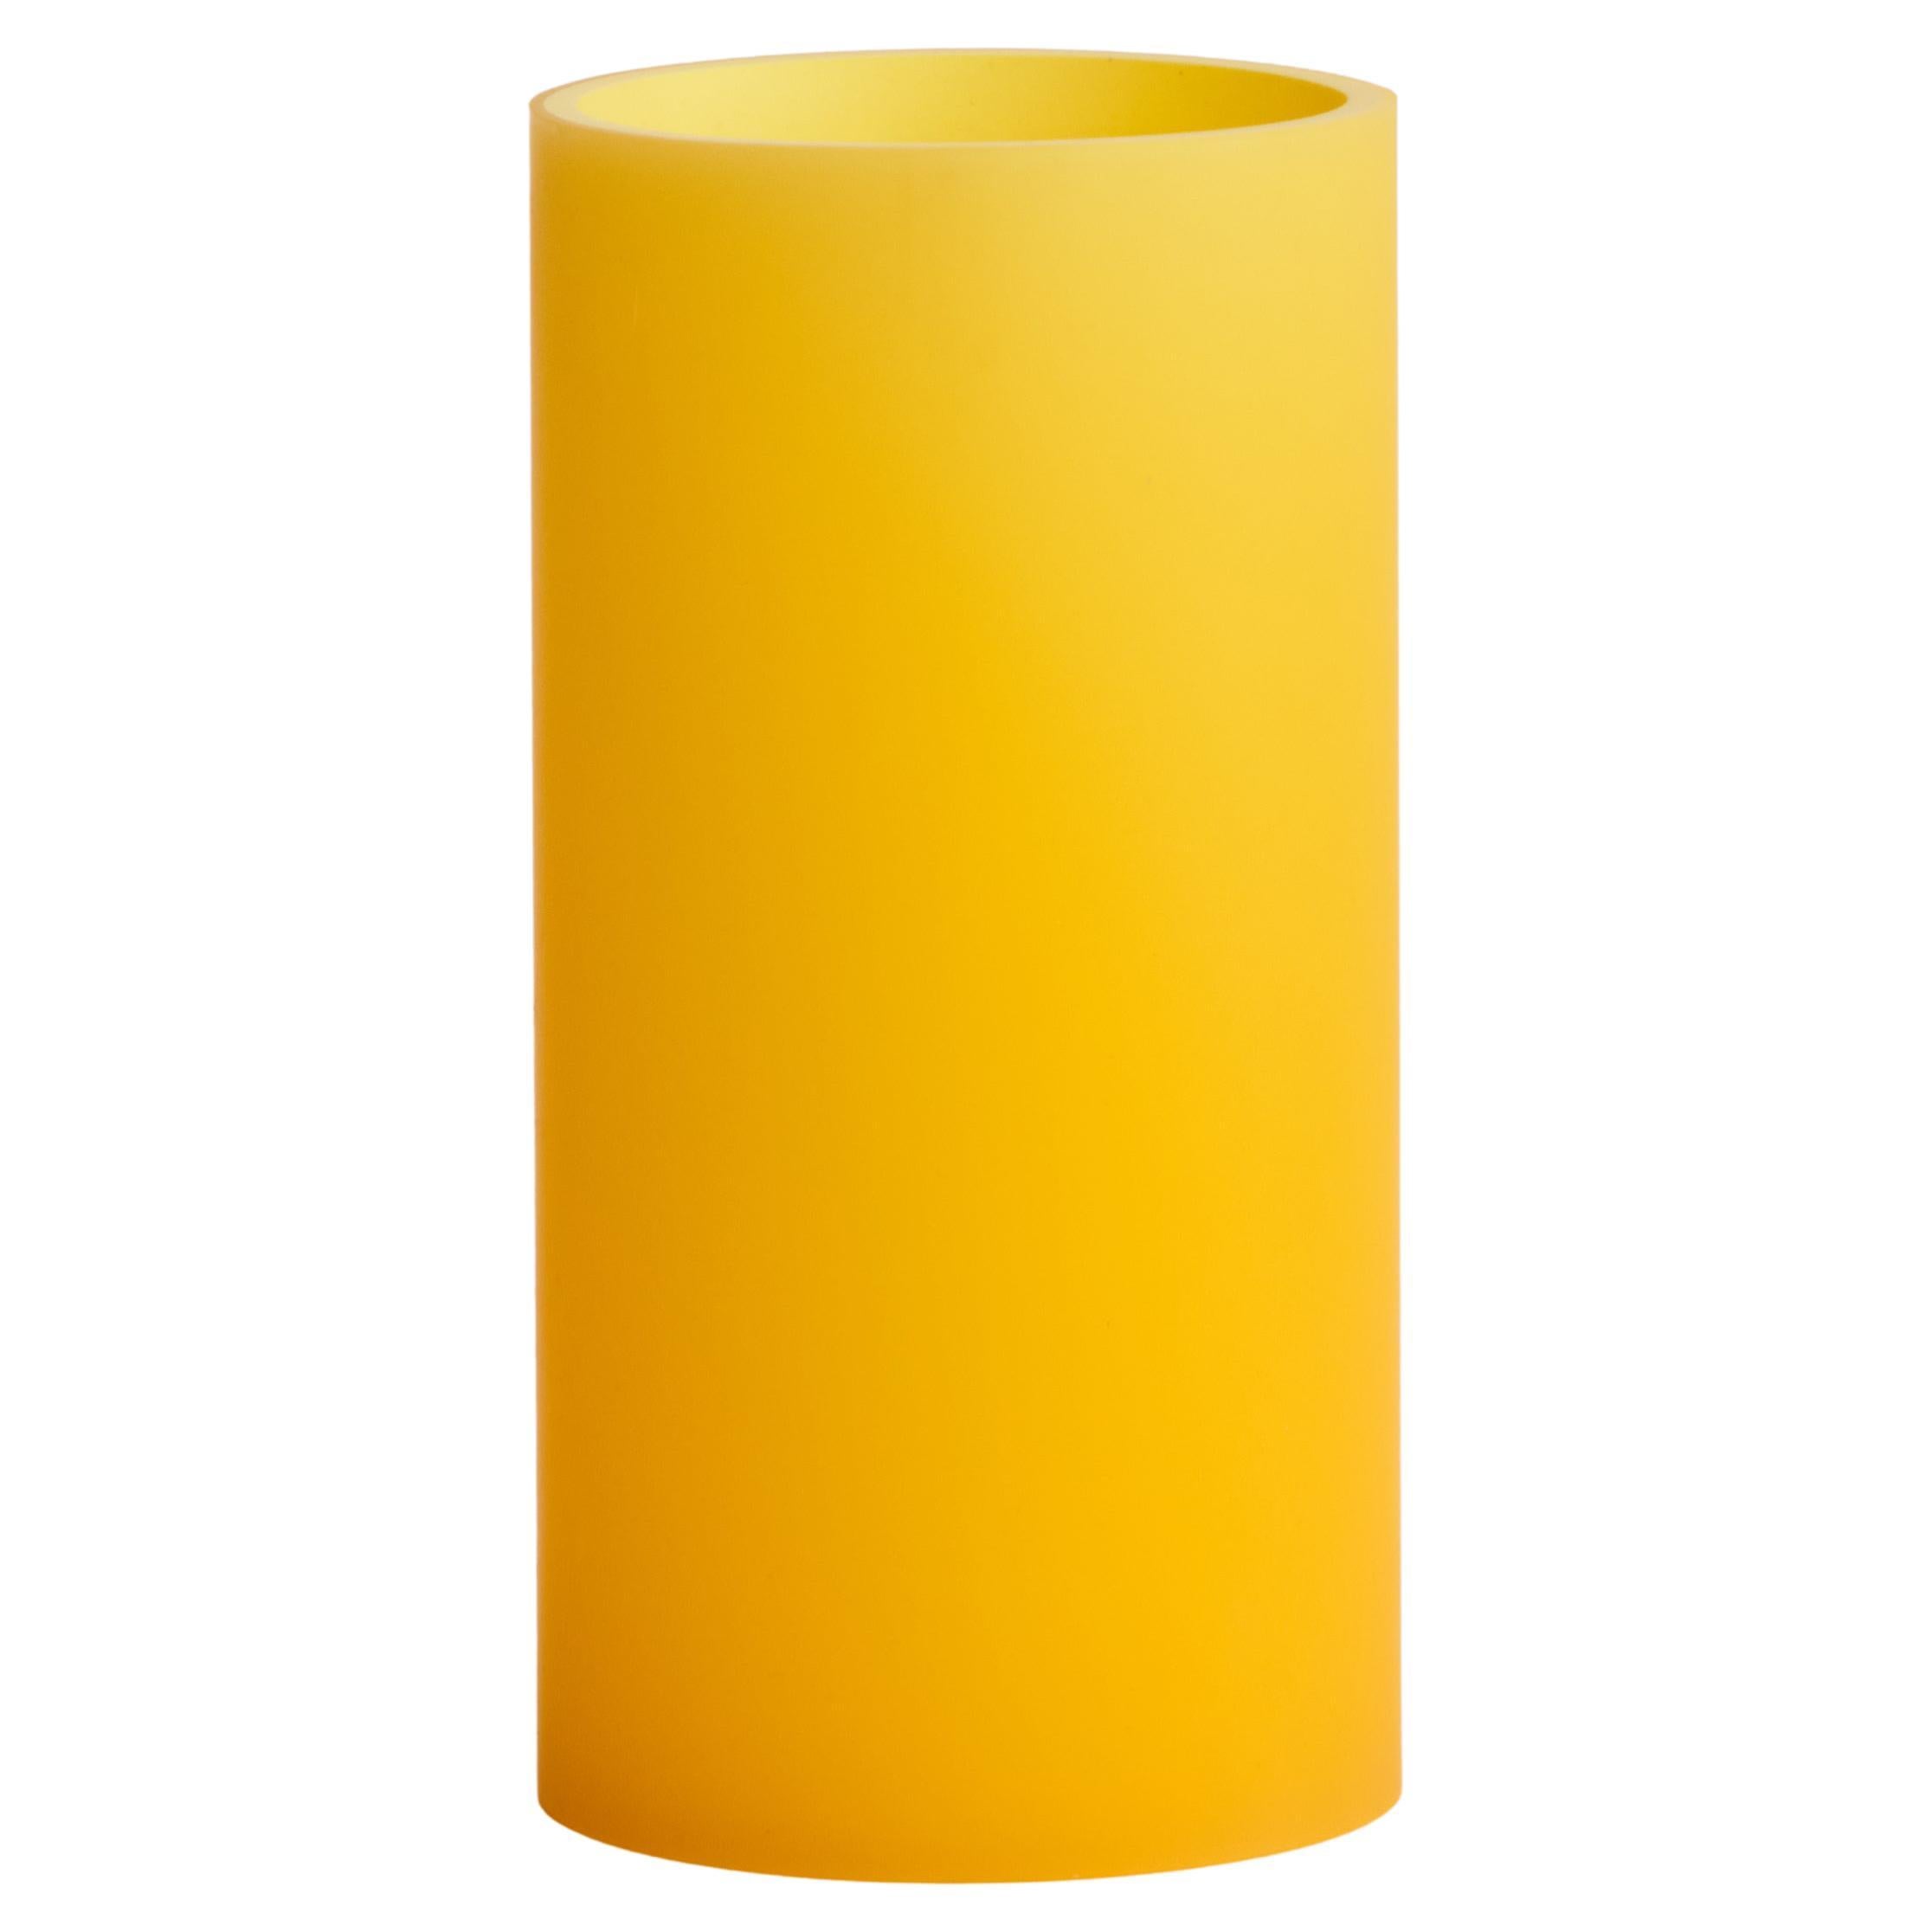 Meld Cylinder Resin Vase/Decor in Yellow by Facture, REP by Tuleste Factory